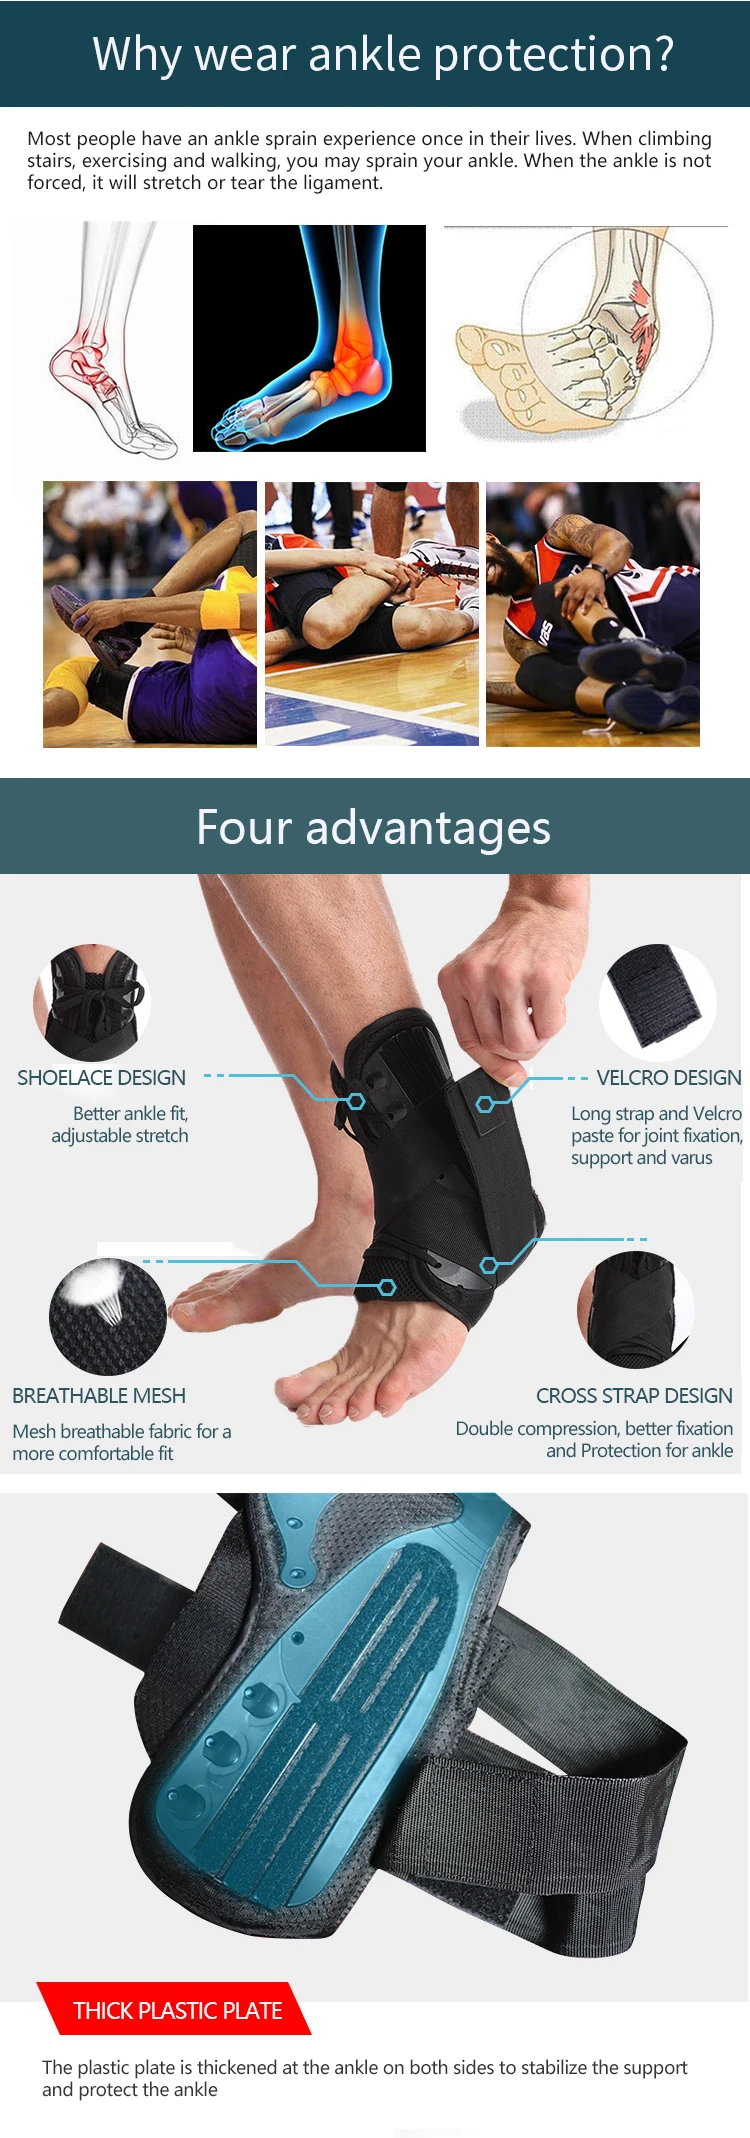 Enerup Professional Men Women Basketball Soft Silicone Pro Ankle Splint Foot Support Brace Sleeve Elastic Strap Support Wrap